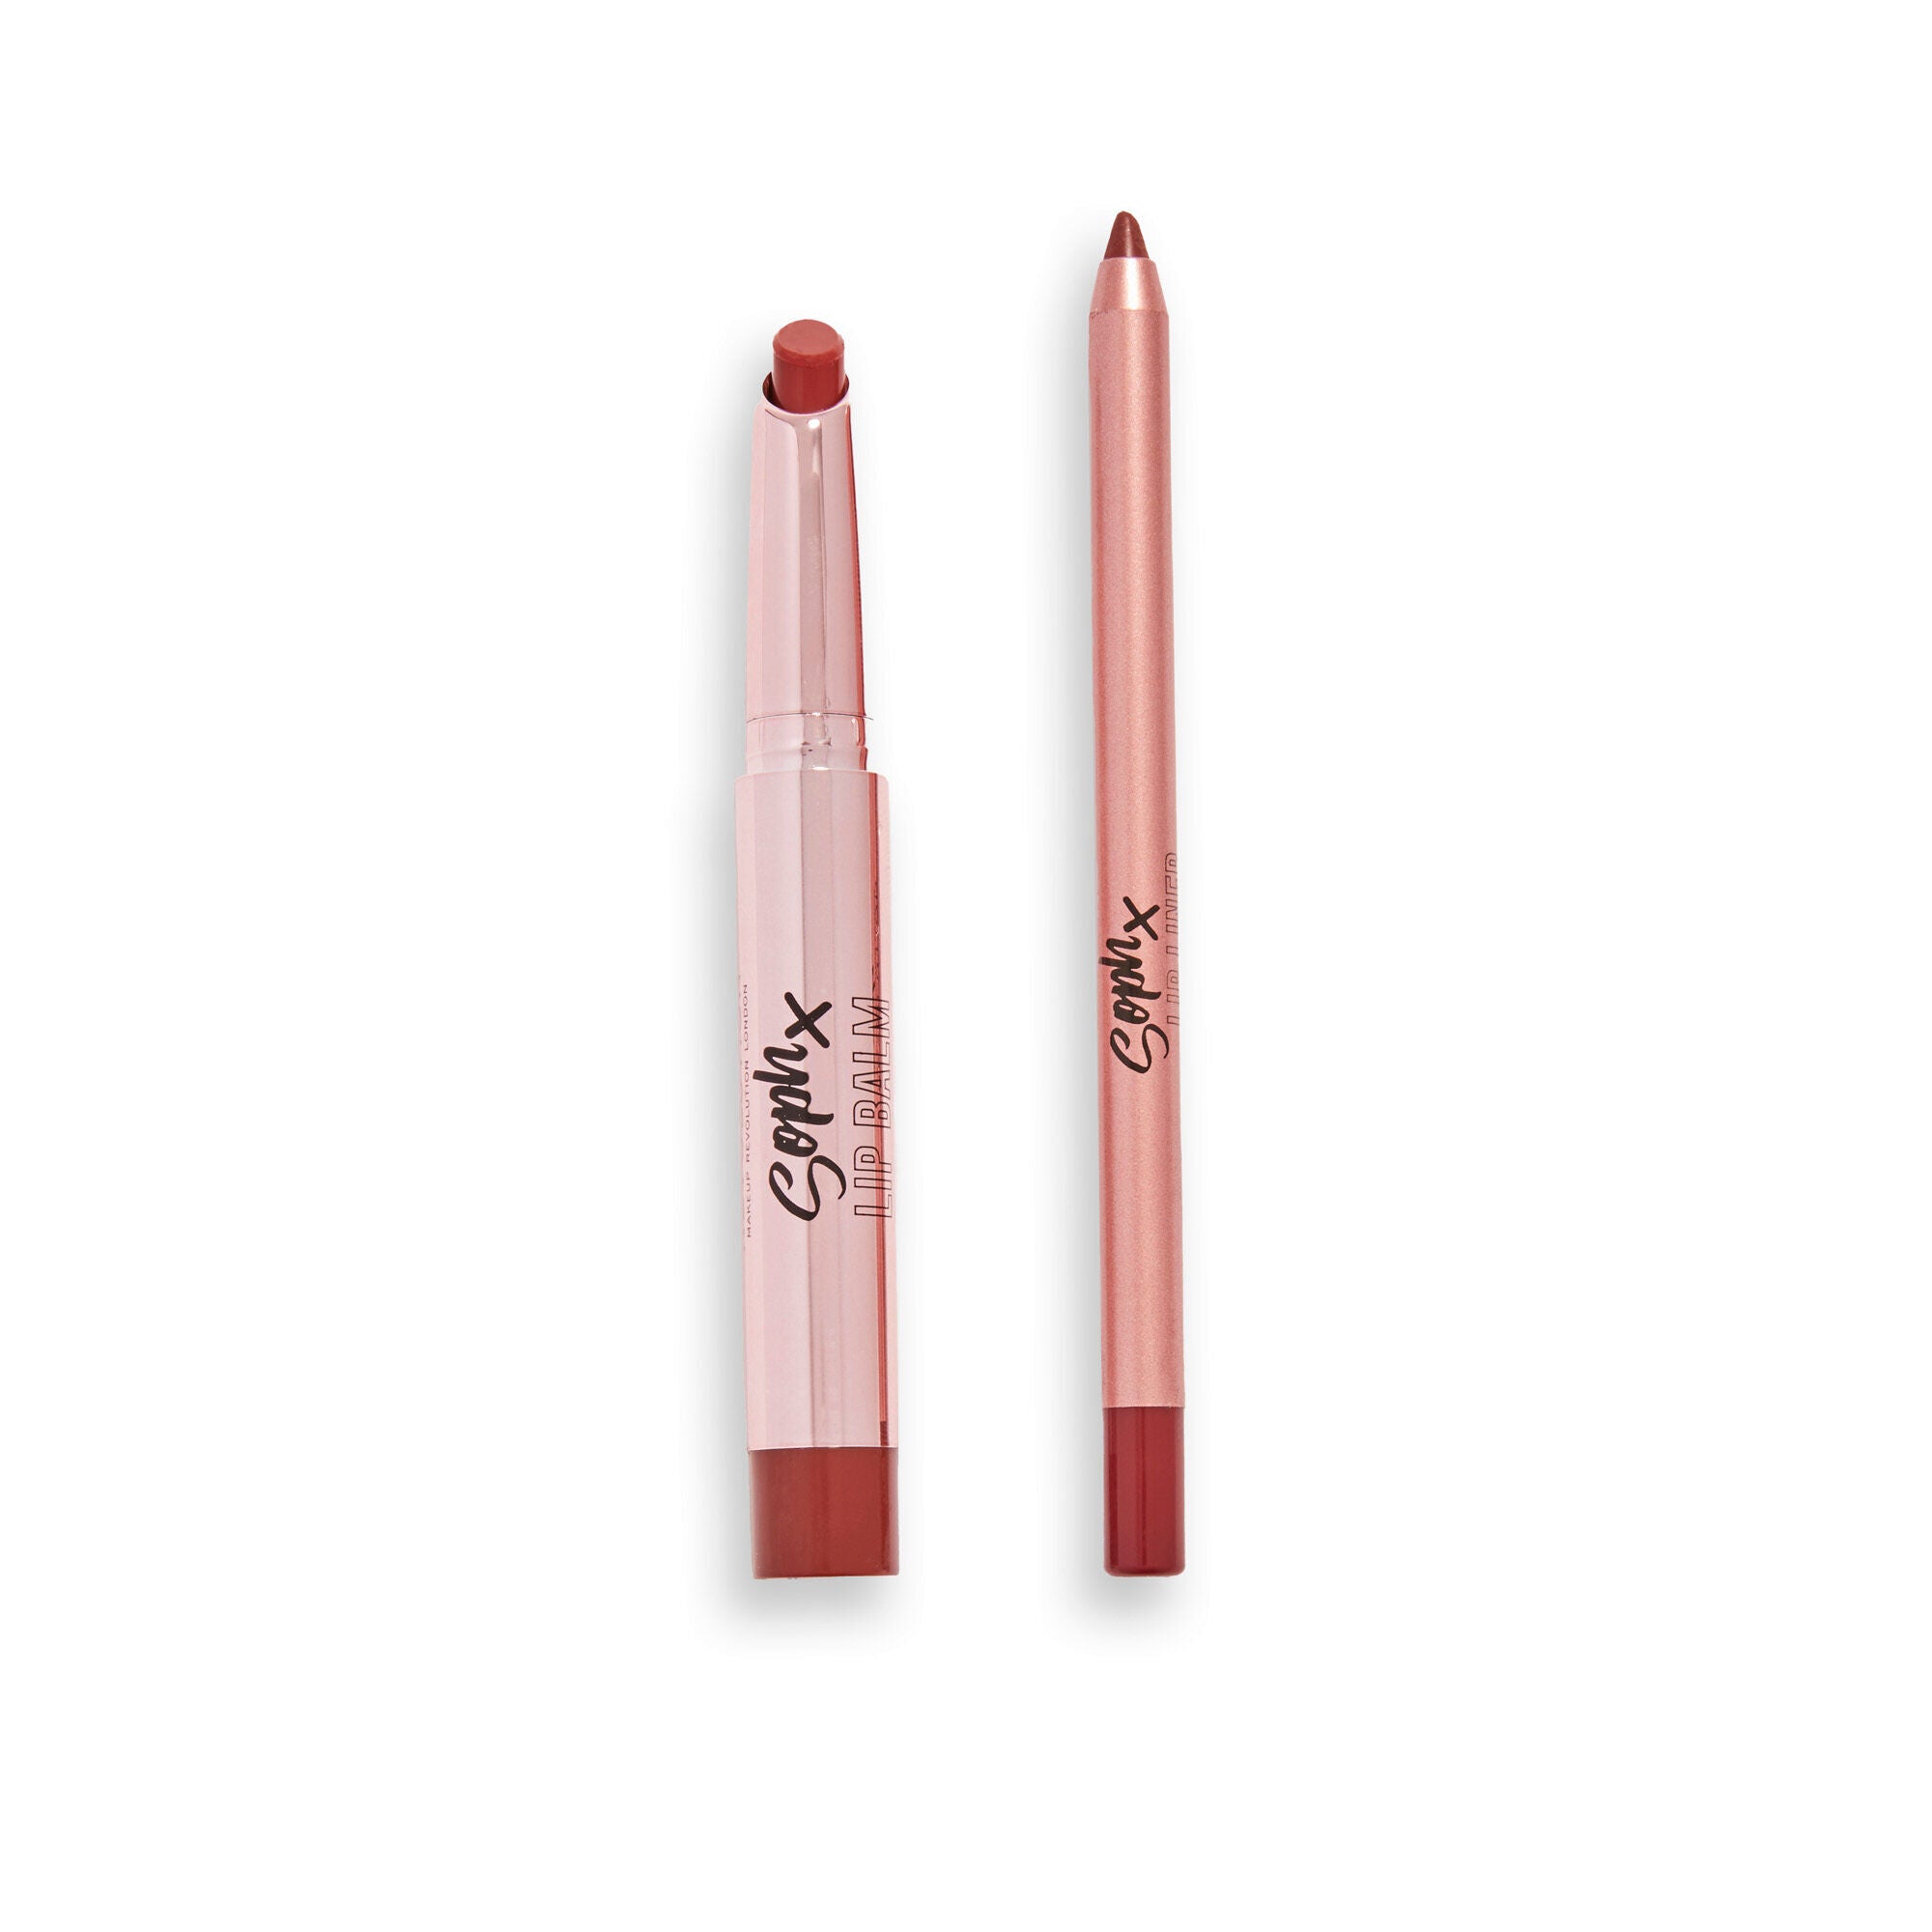 Makeup Revolution X Soph Lip Set - Toffee Drizzle, open